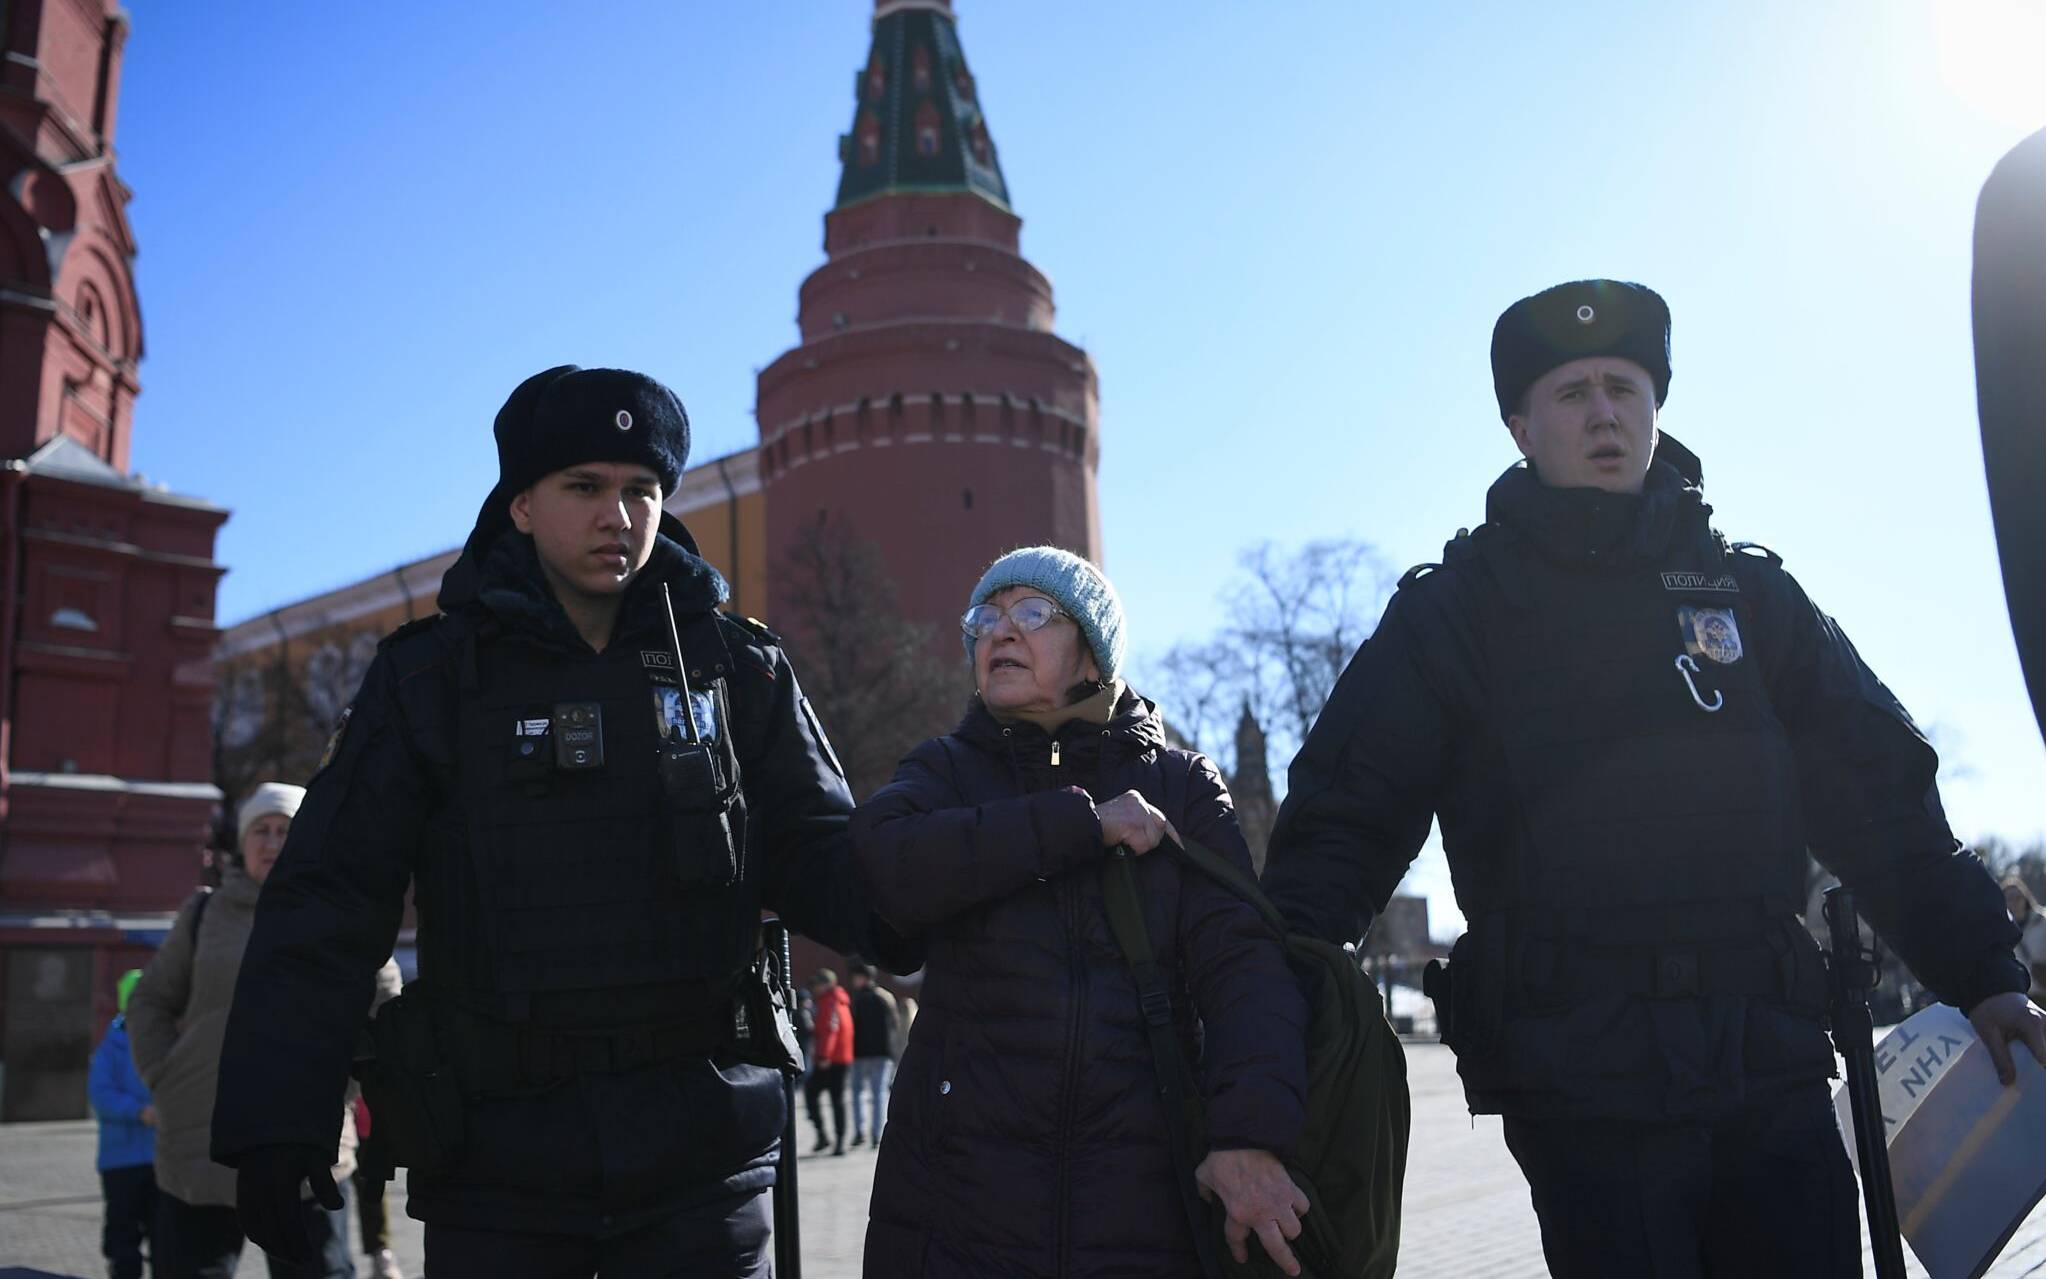 Police officers detain an elderly woman as she protests against Russia's invasion of Ukraine, in central Moscow on March 20, 2022. (Photo by - / AFP)